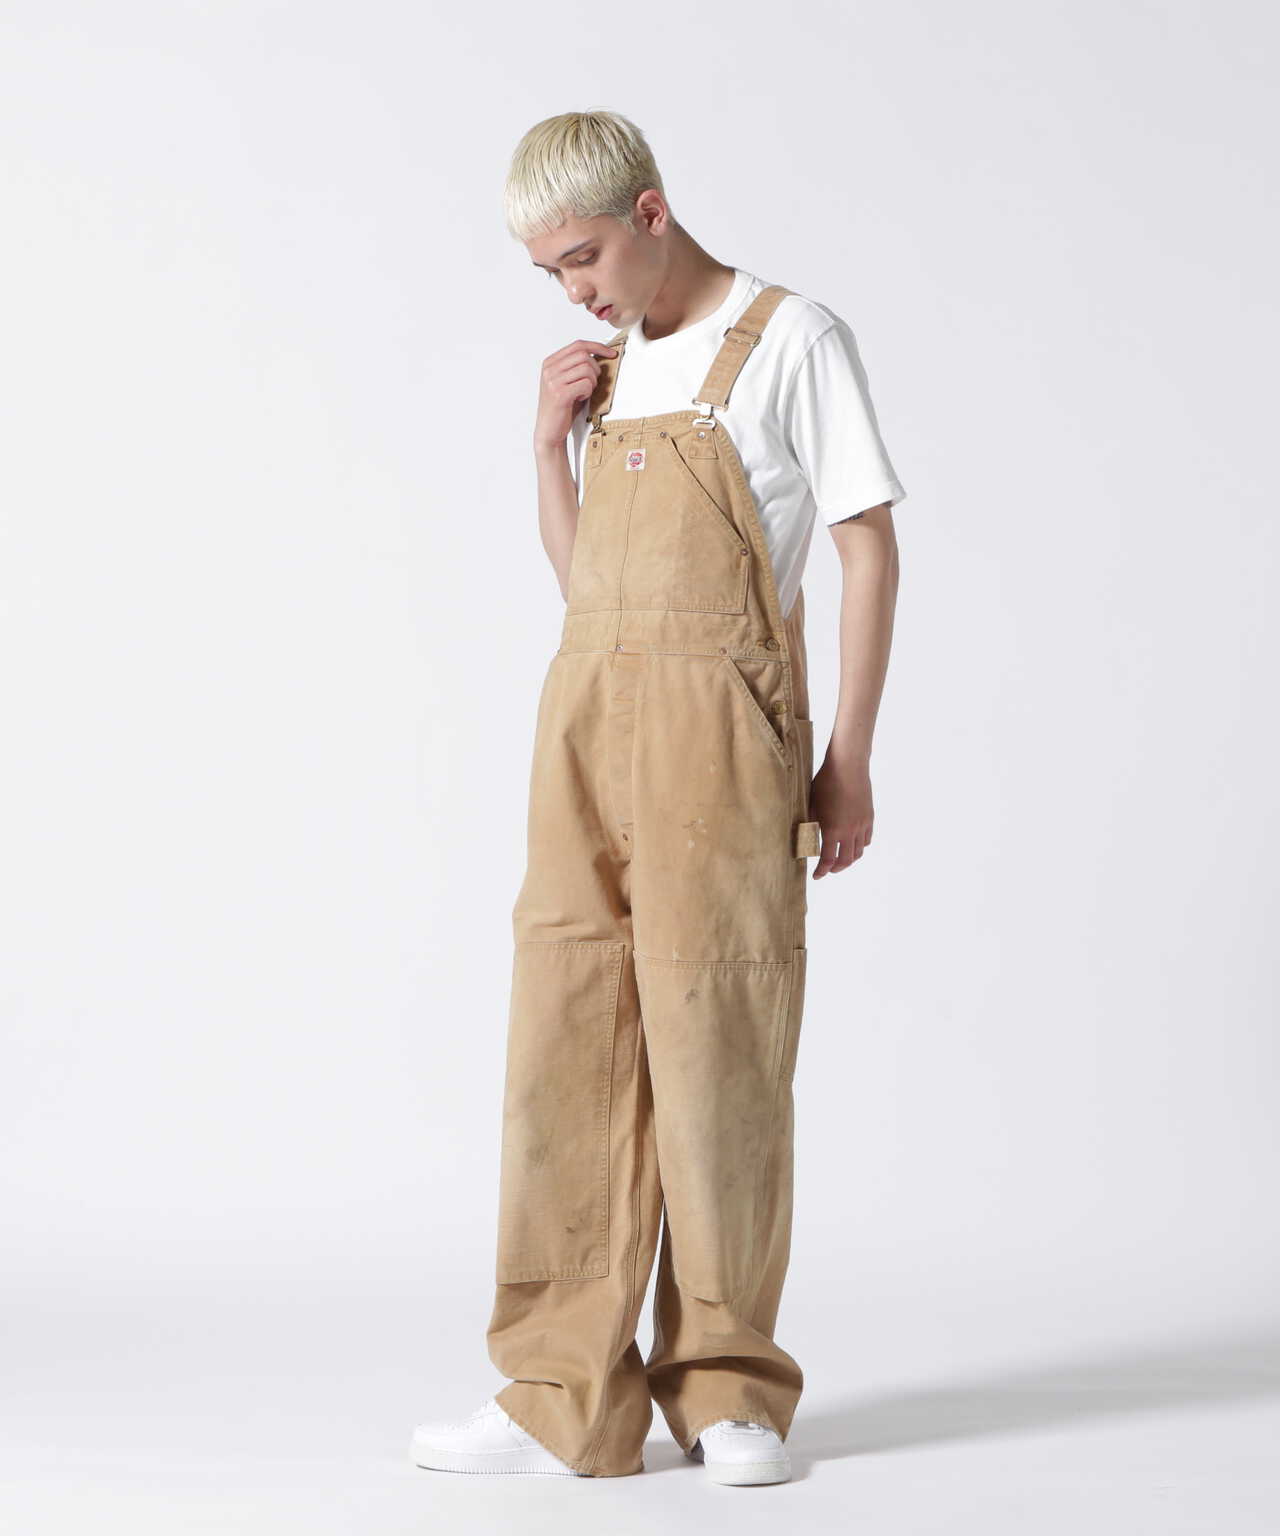 SAINT MICHAEL/セント マイケル/OVERALL/DOUBLE KNEE/BEIGE | ROYAL 